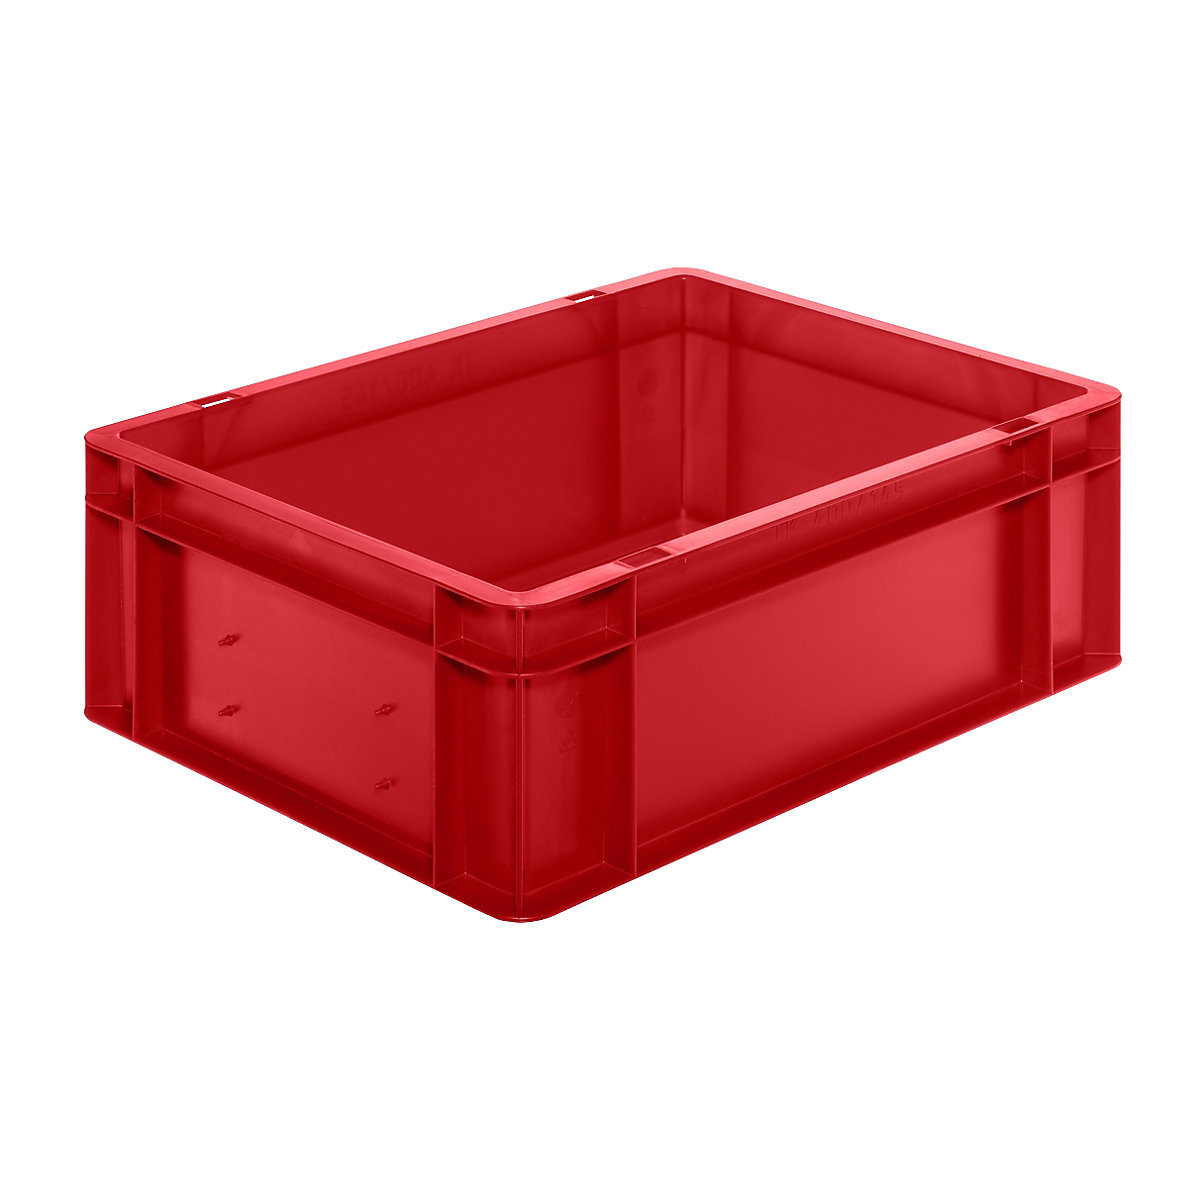 Euro stacking container, closed walls and base, LxWxH 400 x 300 x 145 mm, red, pack of 5